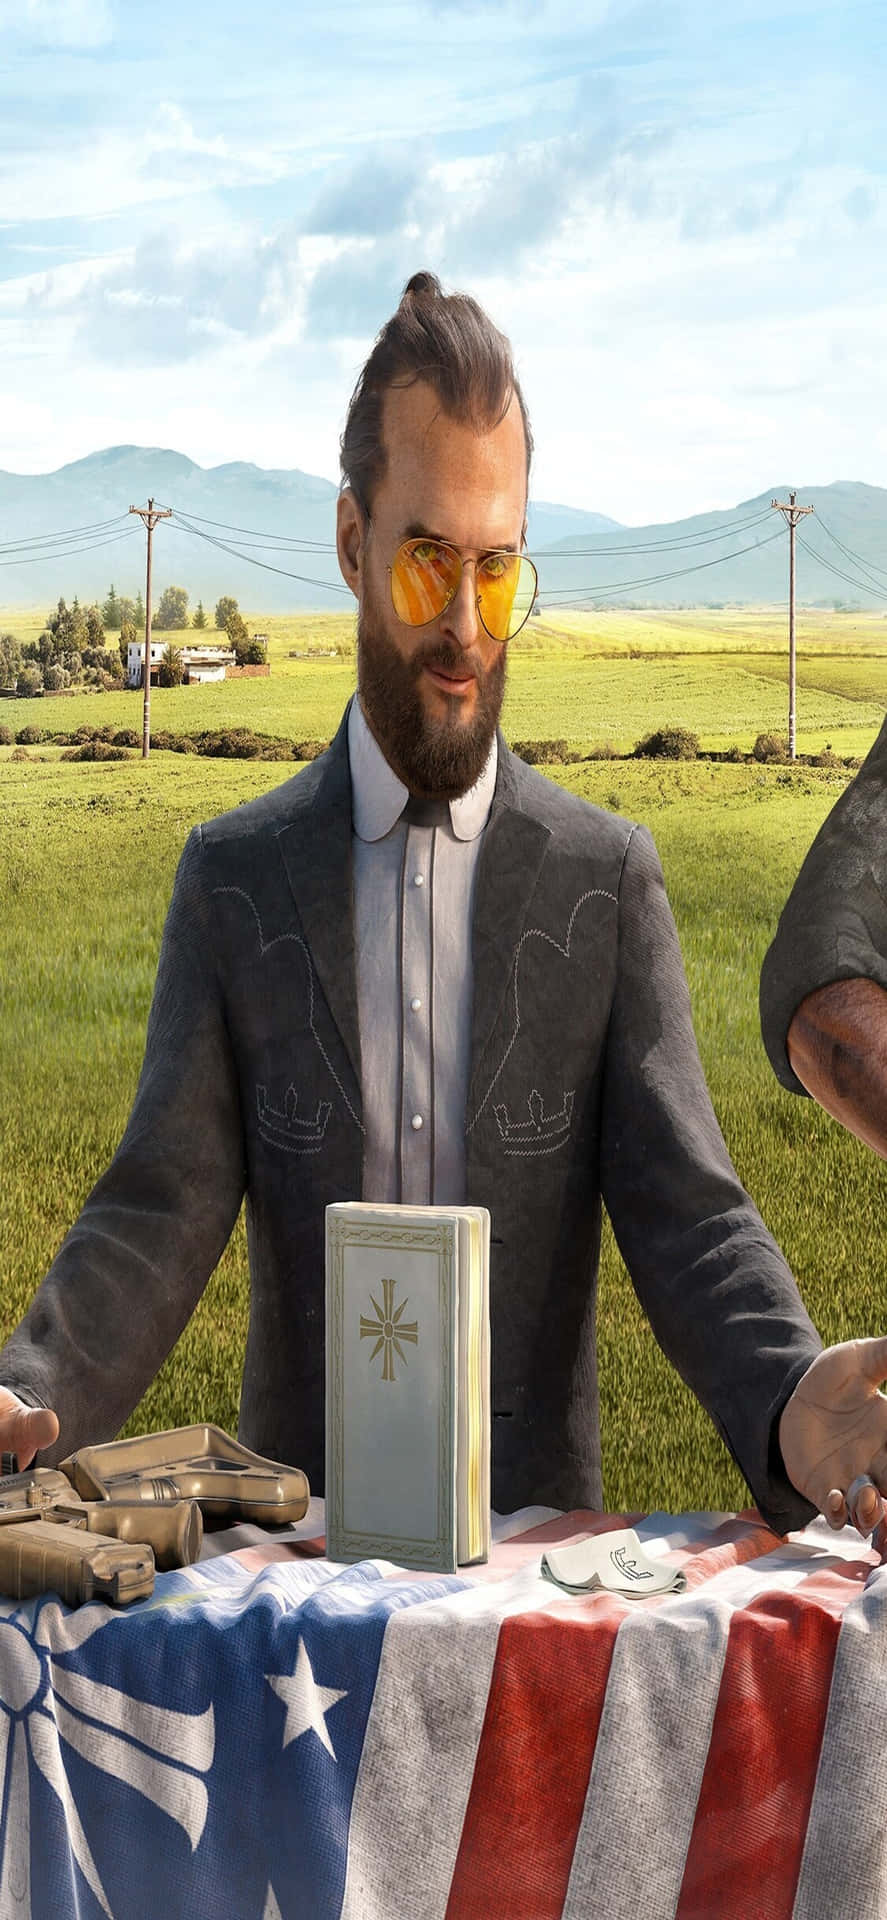 Experience the action of Far Cry 5 with the new Iphone XS!